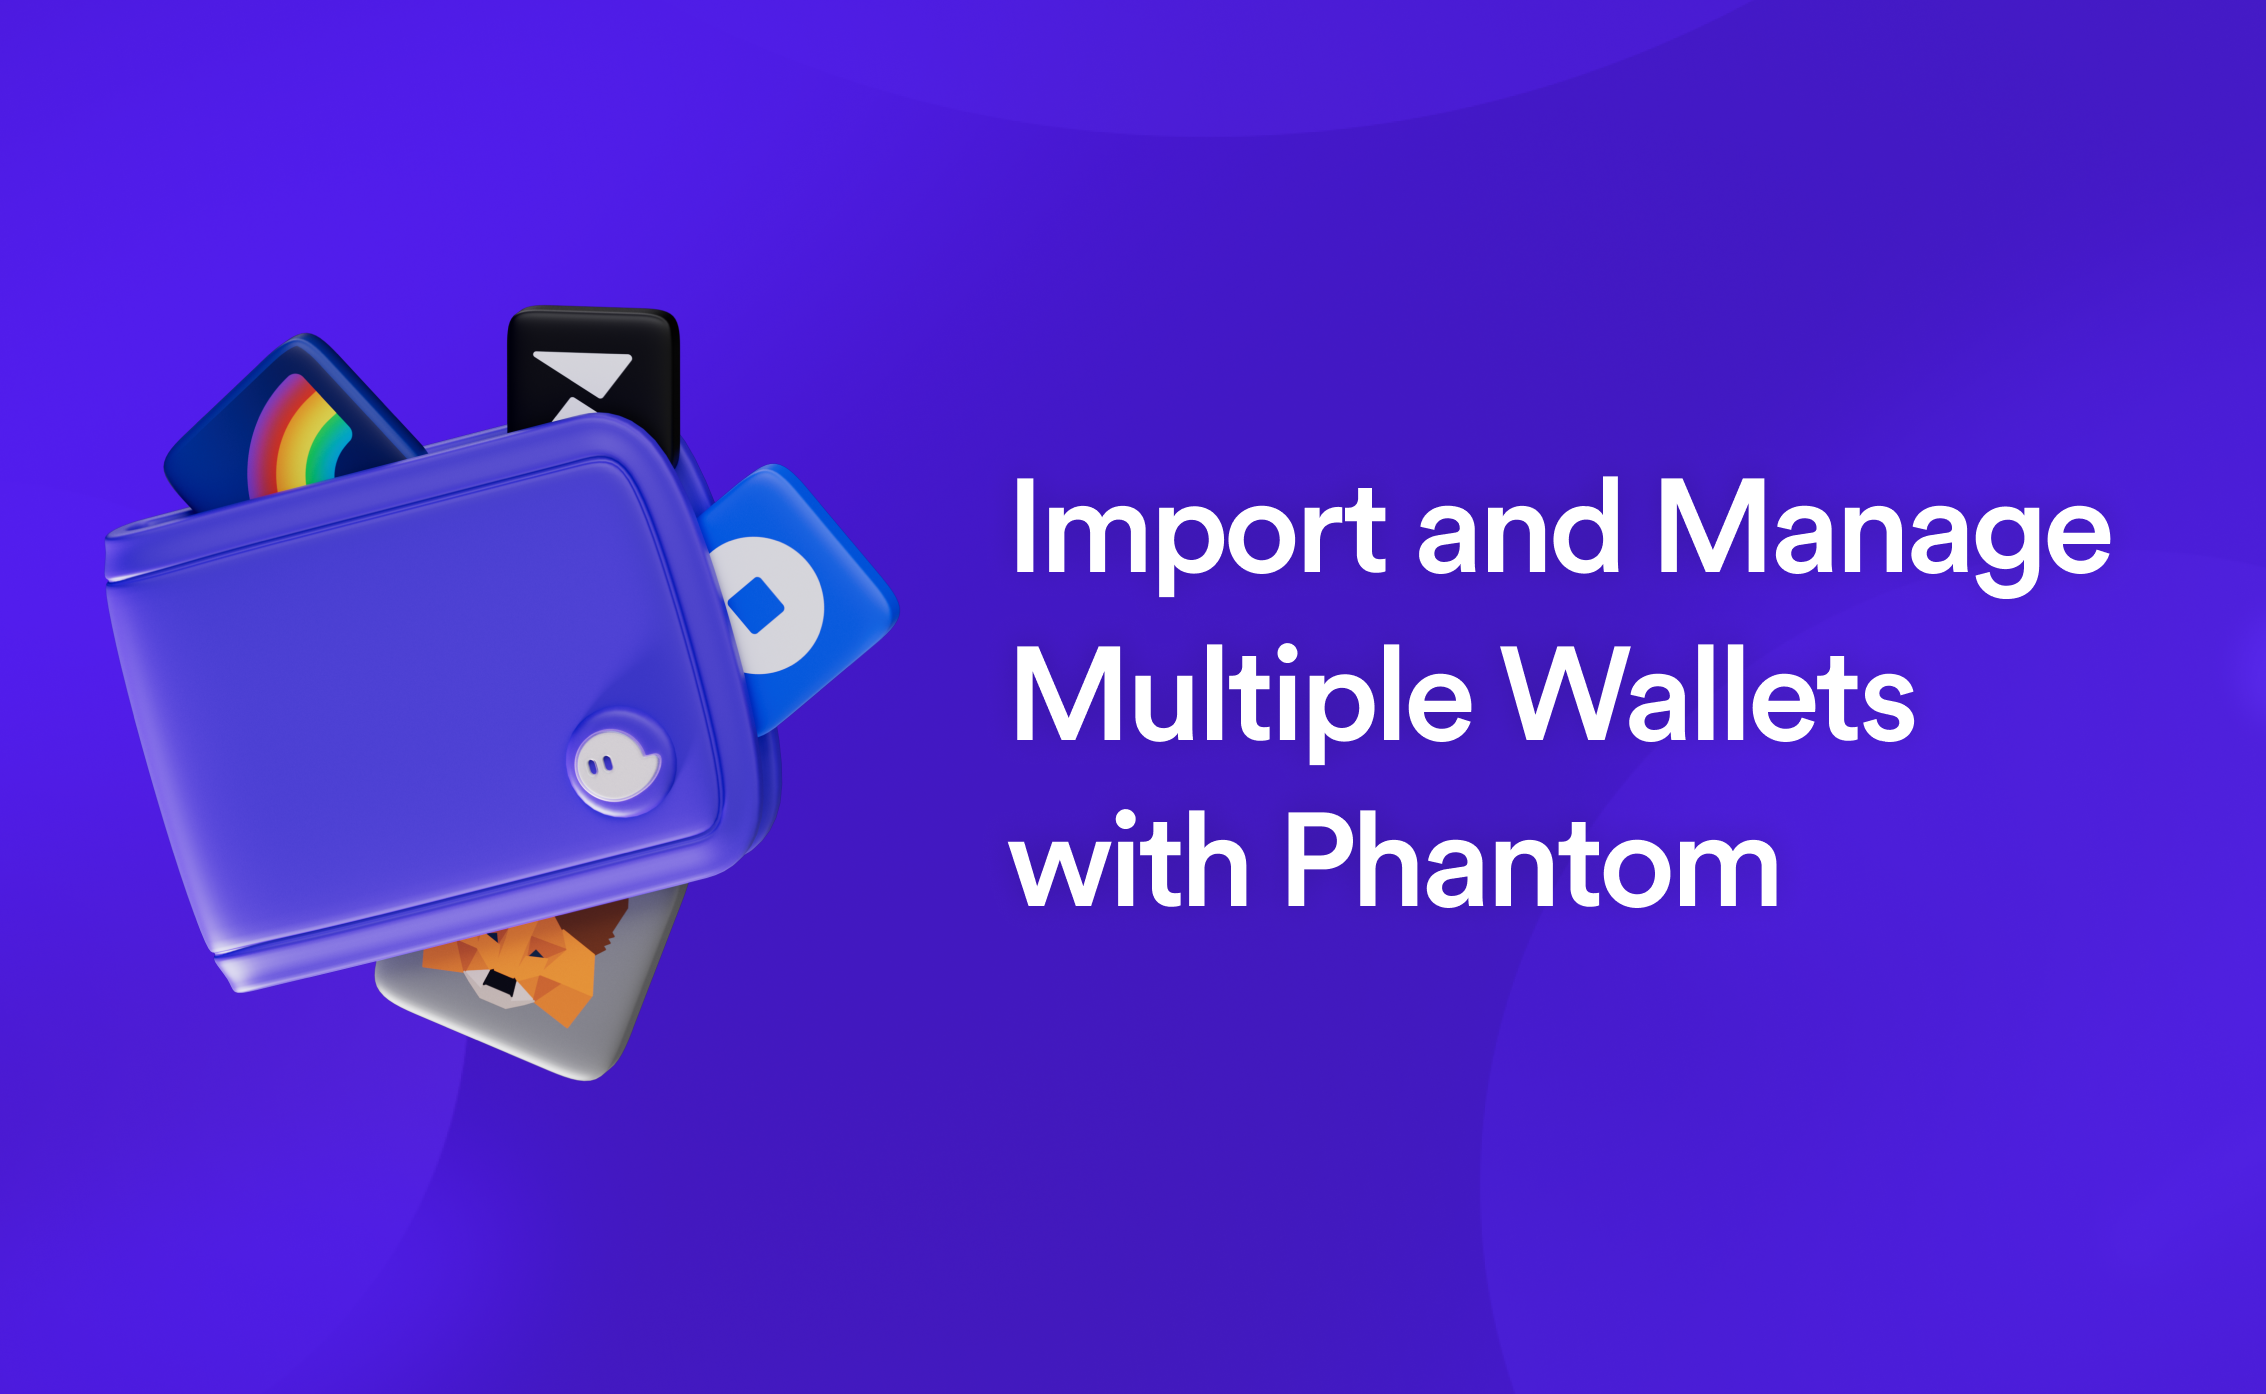 Import and Manage Multiple Wallets with Phantom